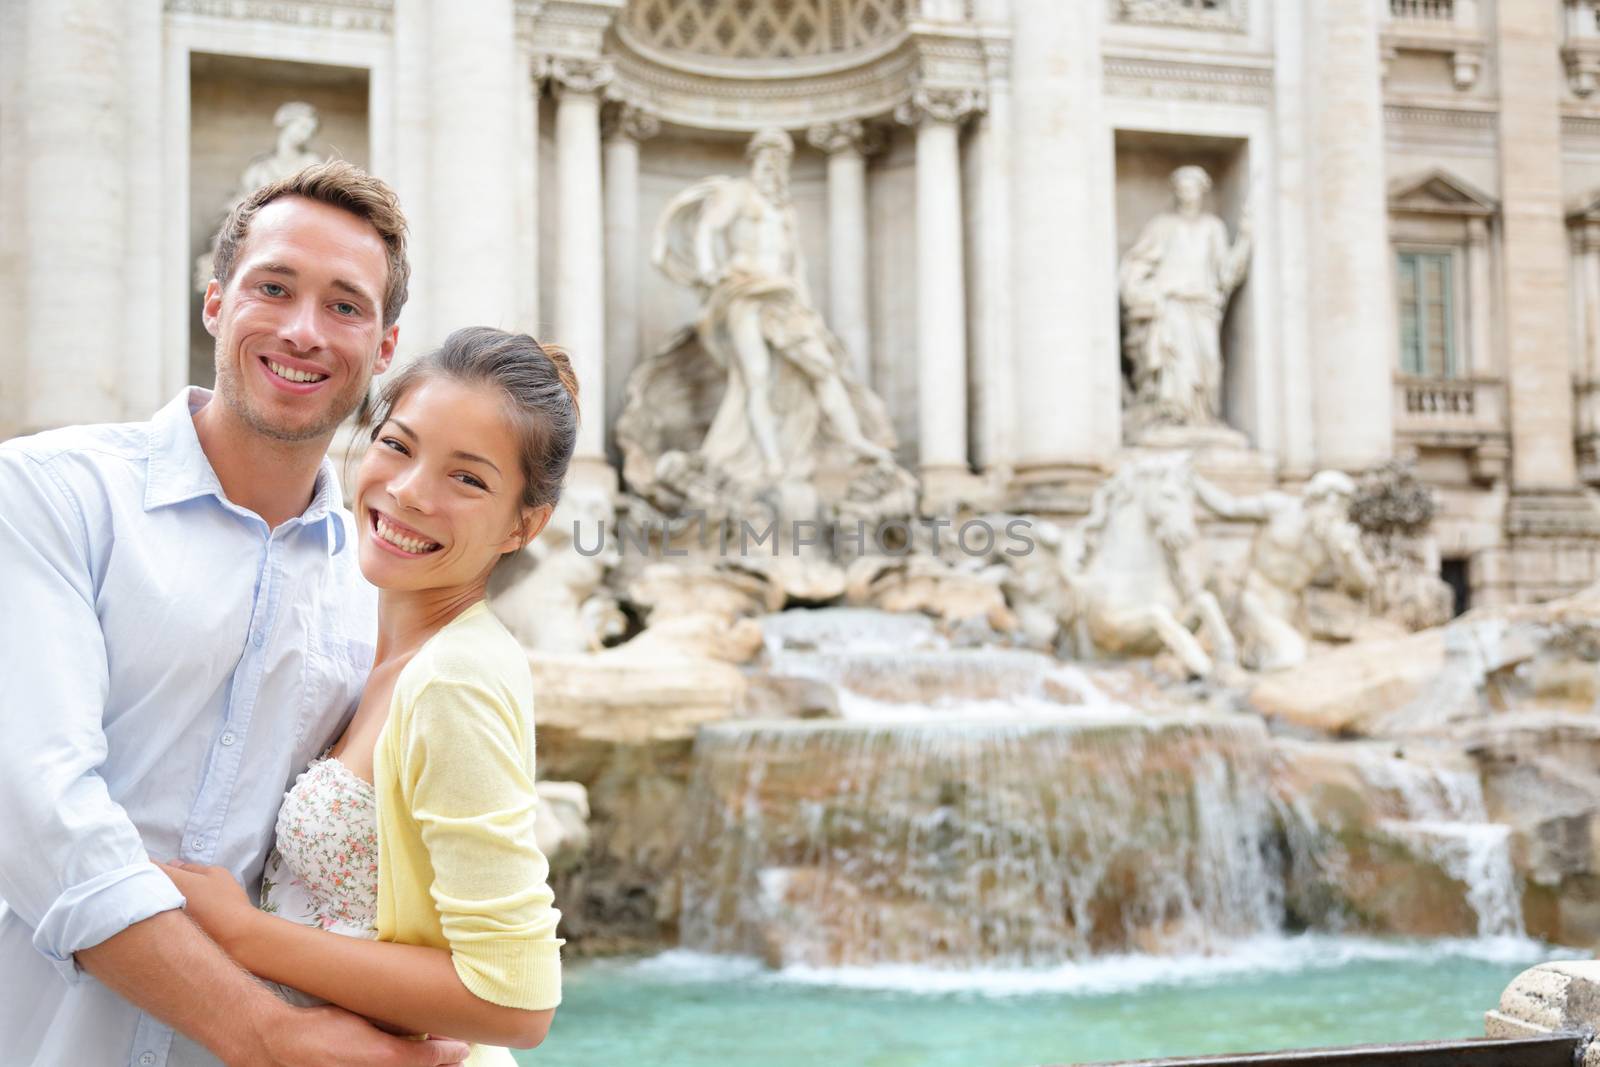 Rome travel - couple in love at Trevi Fountain by Maridav